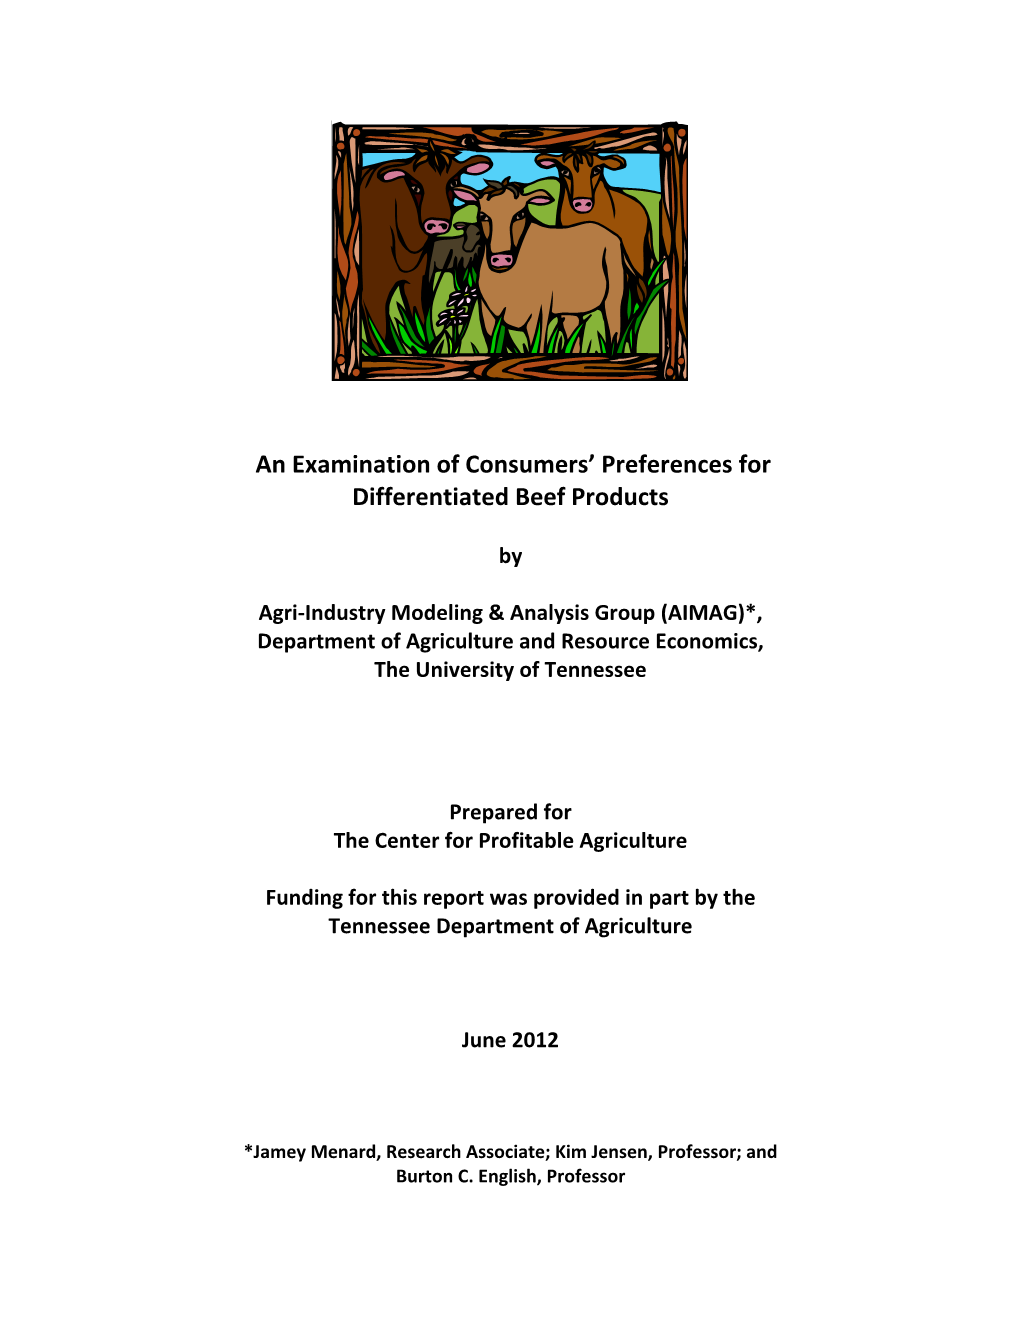 An Examination of Consumers' Preferences for Differentiated Beef